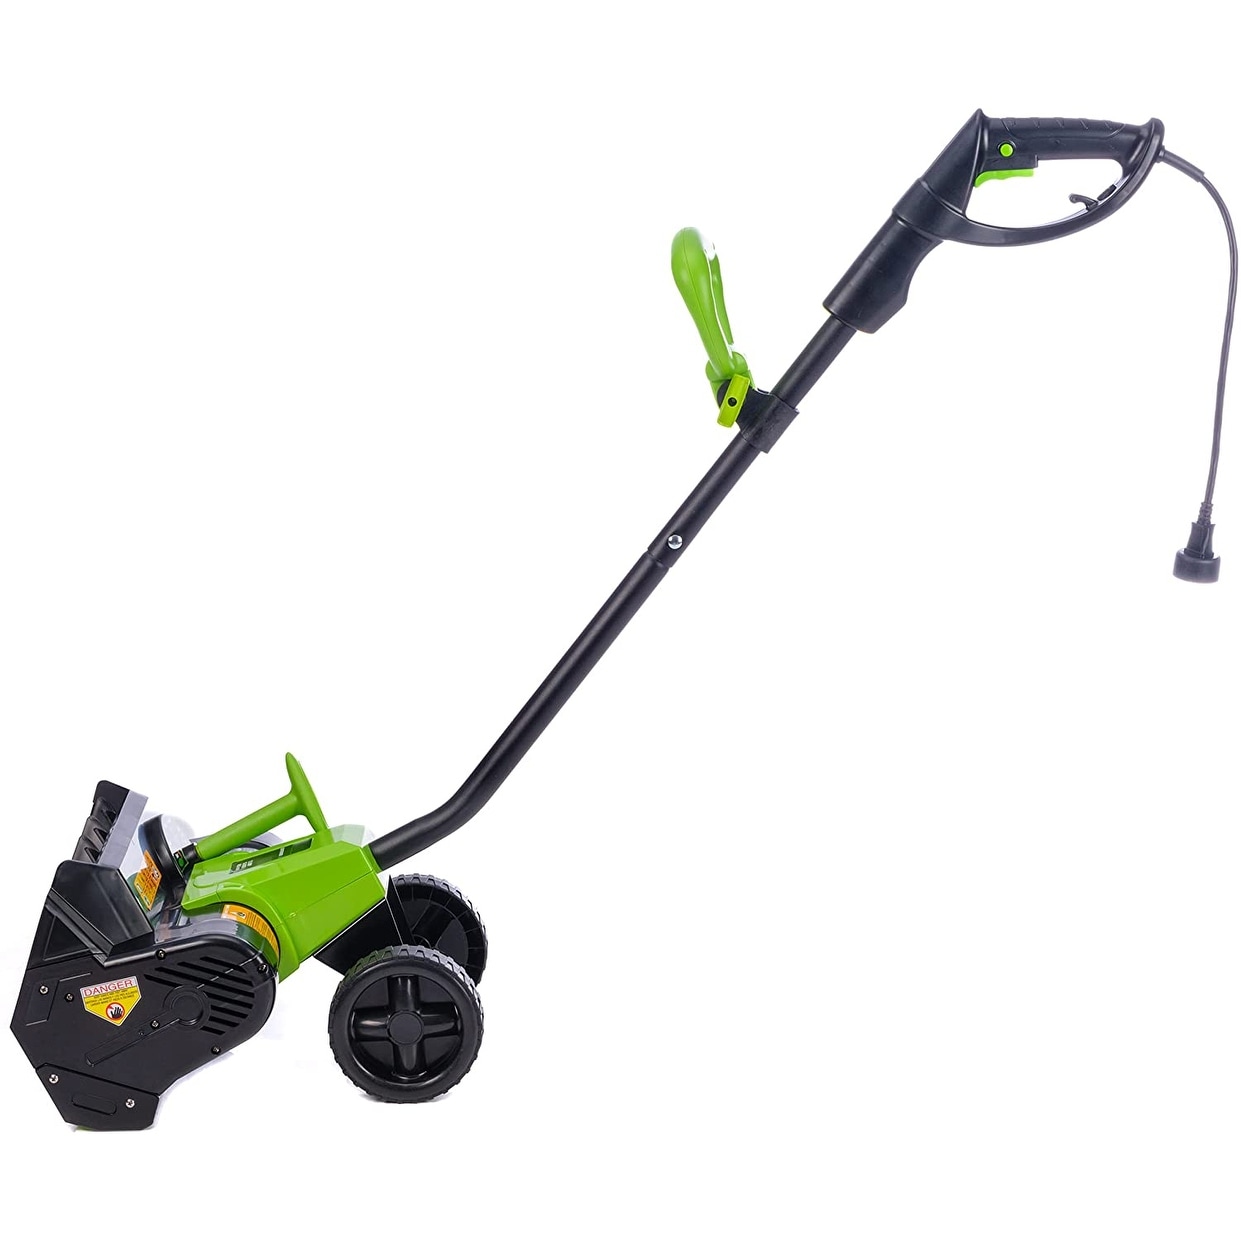 Earthwise 16- Inch Corded 12 Amp Snow Thrower SN70016 On Sale Bed  Bath  Beyond 26481720